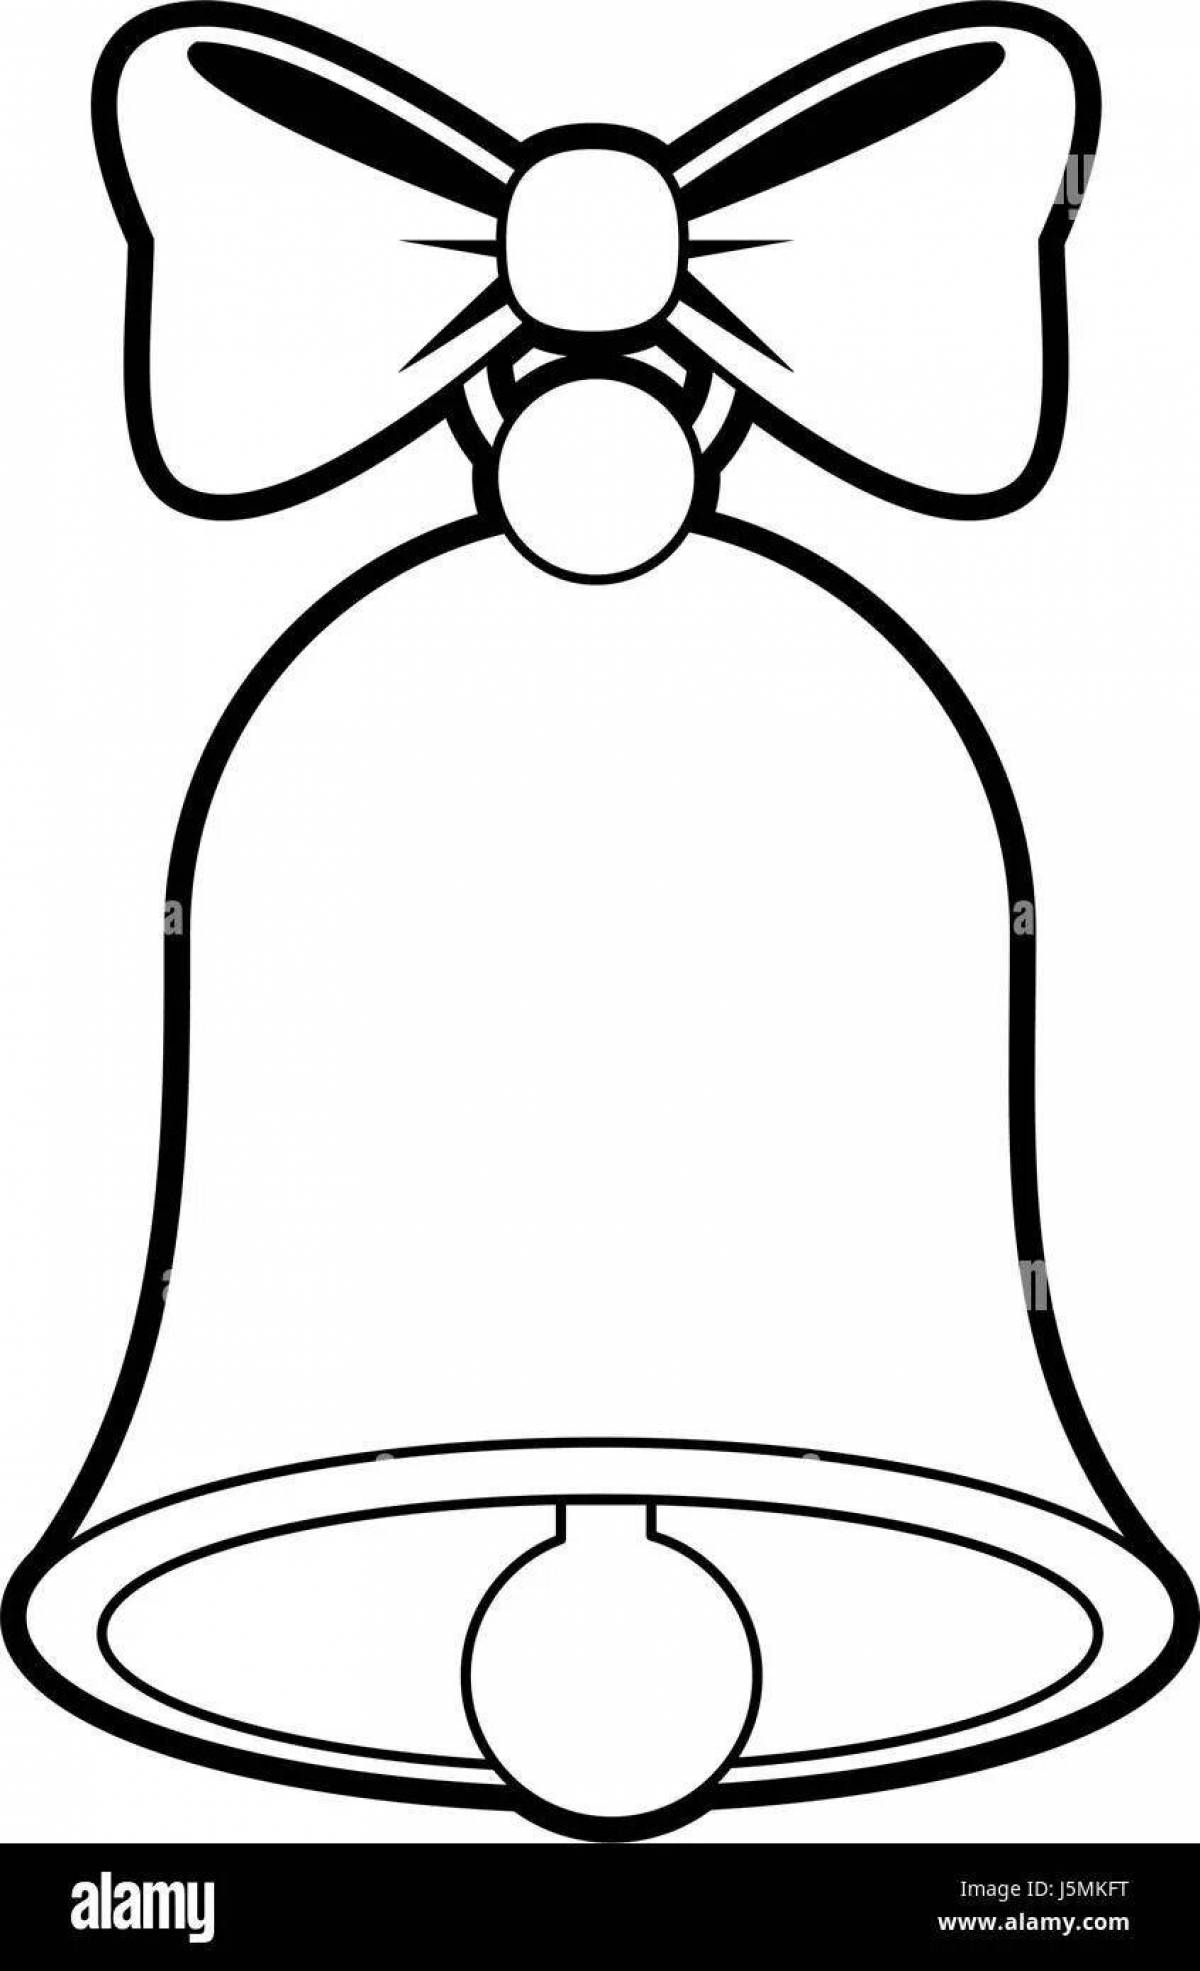 Adorable school bell with a bow